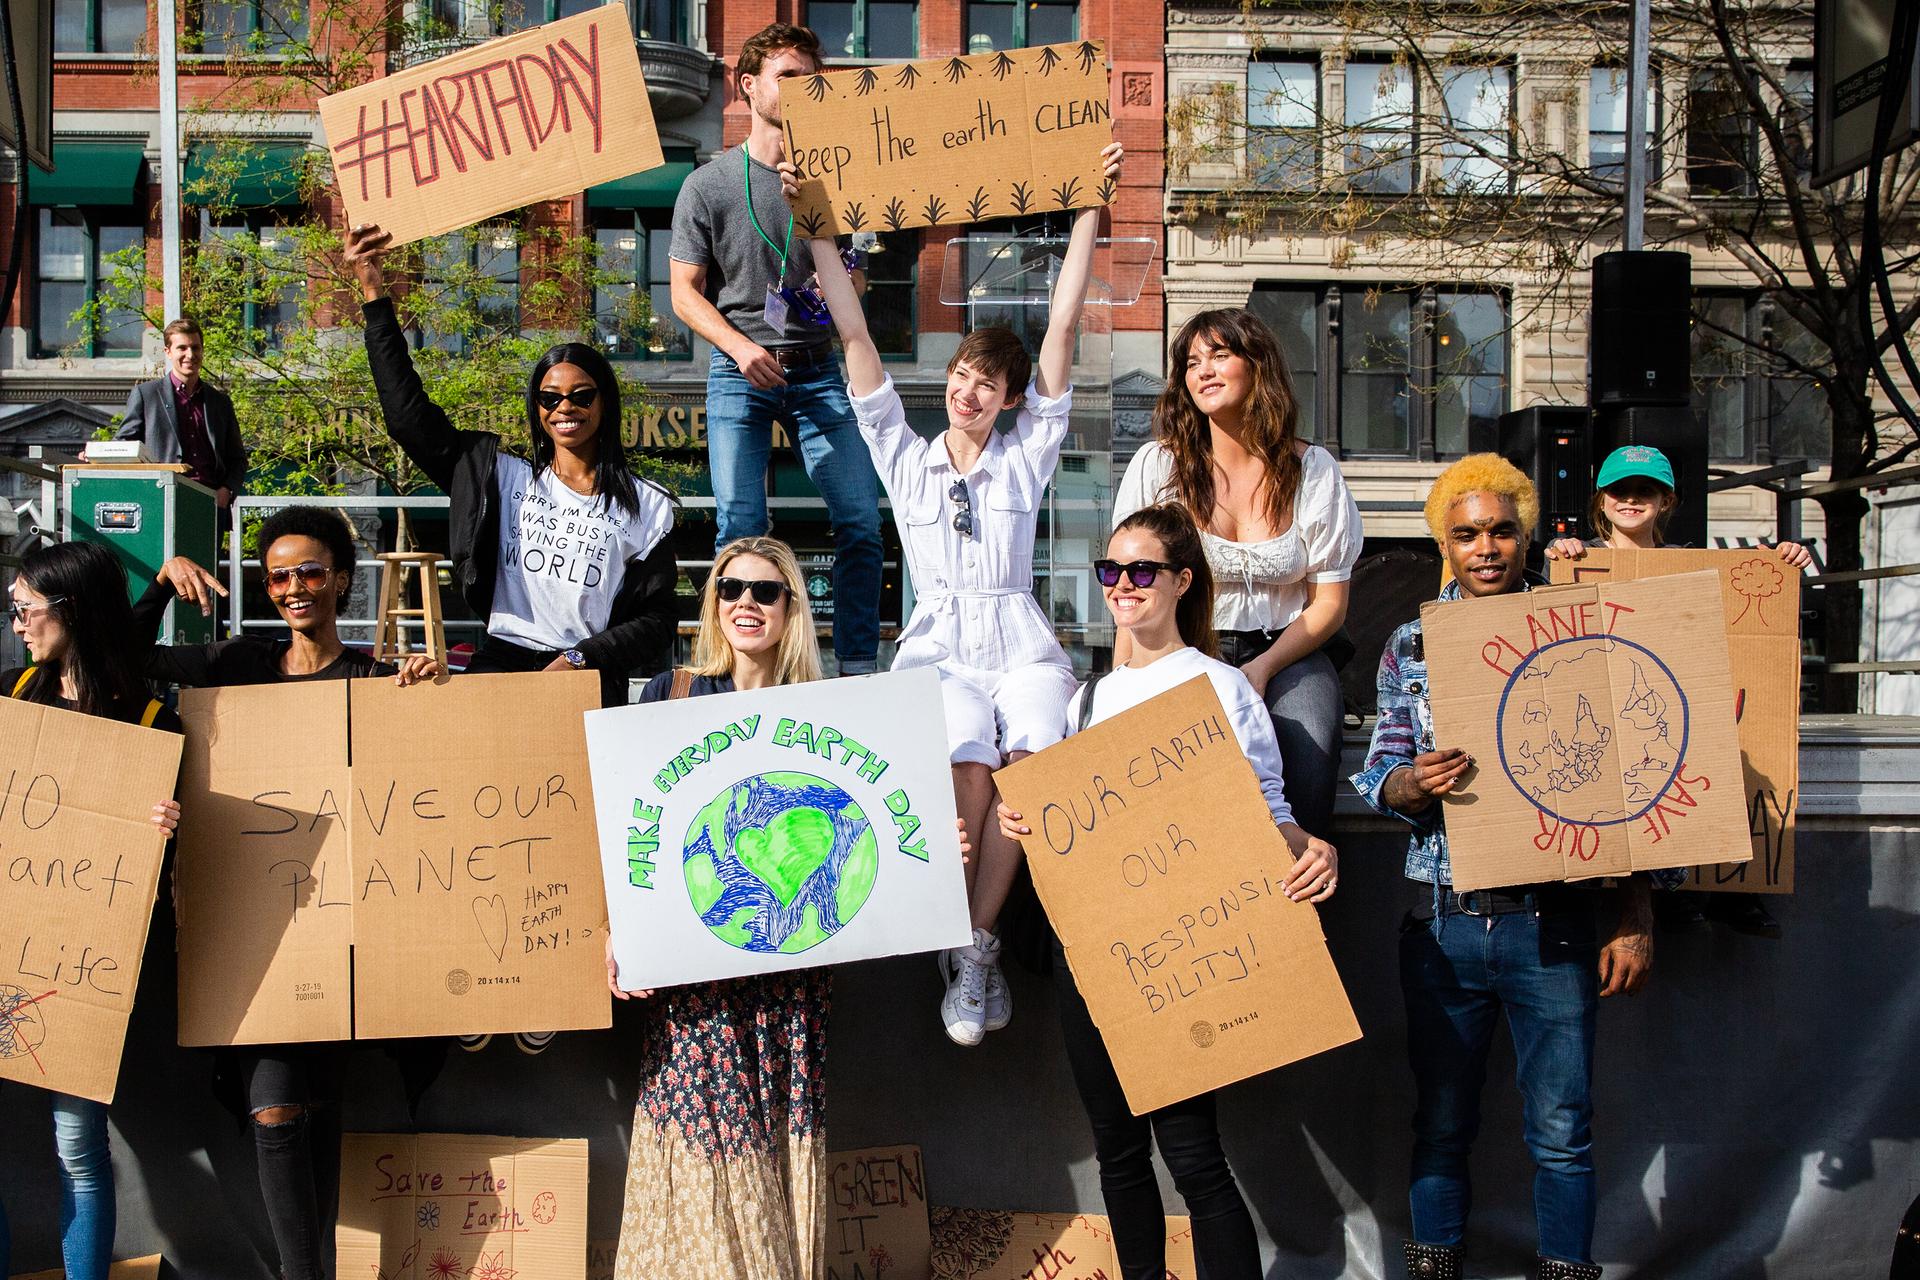 People carry signs during Earth Day, event in Manhattan, New York City 